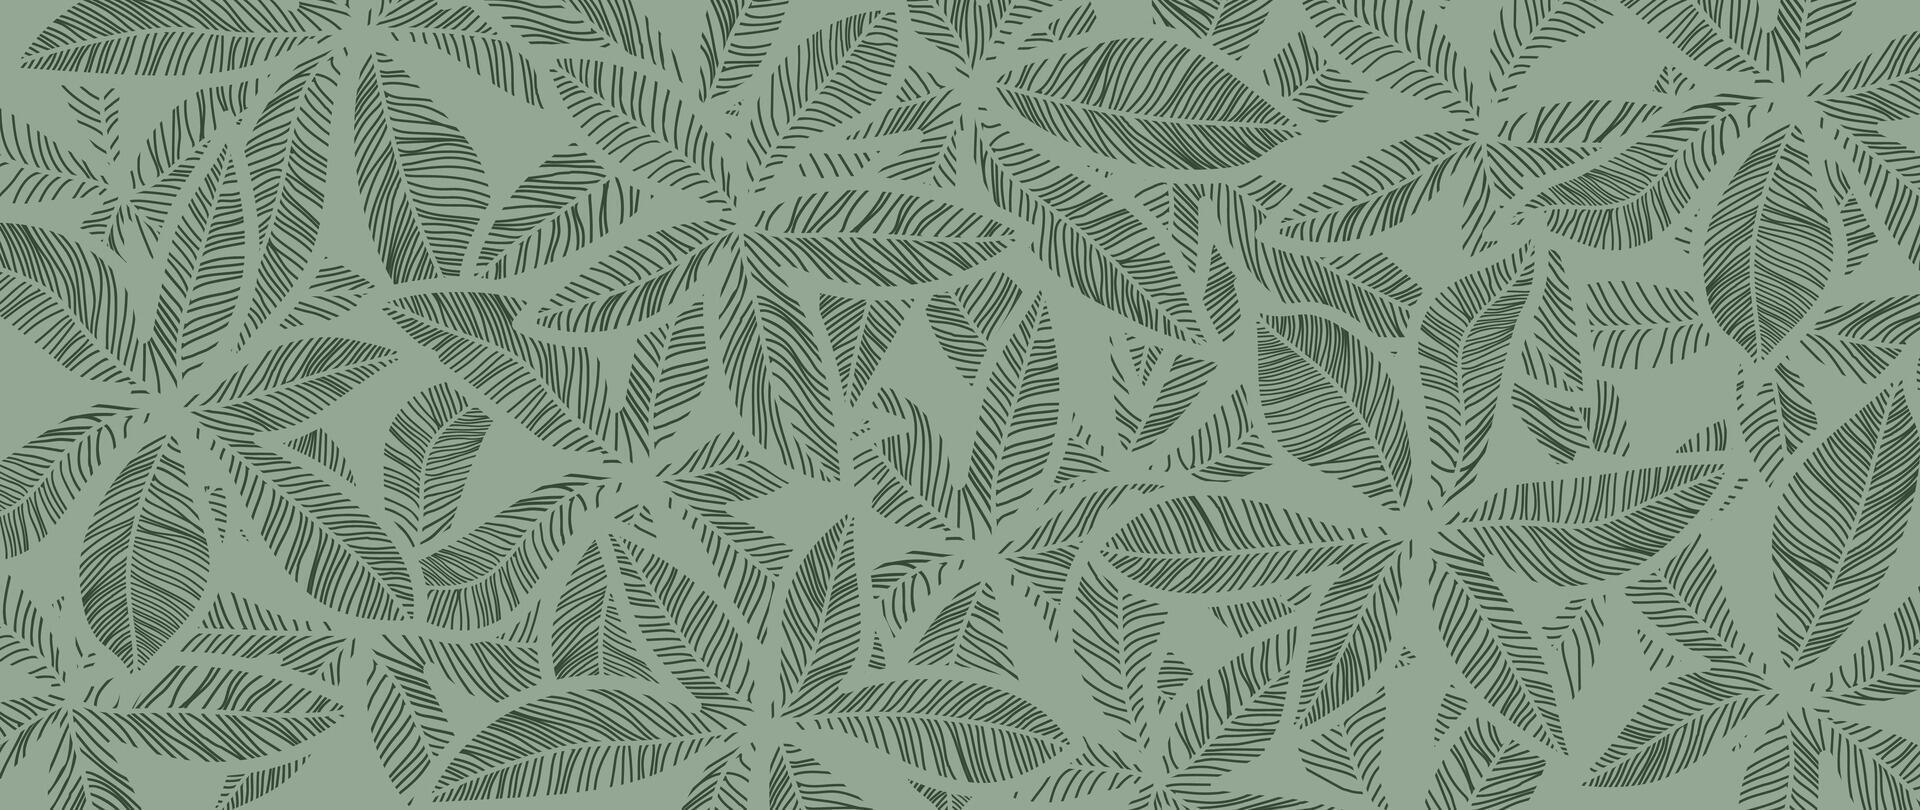 Abstract foliage botanical background vector. Green wallpaper of tropical plants, leaf branches, palm leaves, green line art. Foliage design for banner, prints, decor, wall art, decoration vector